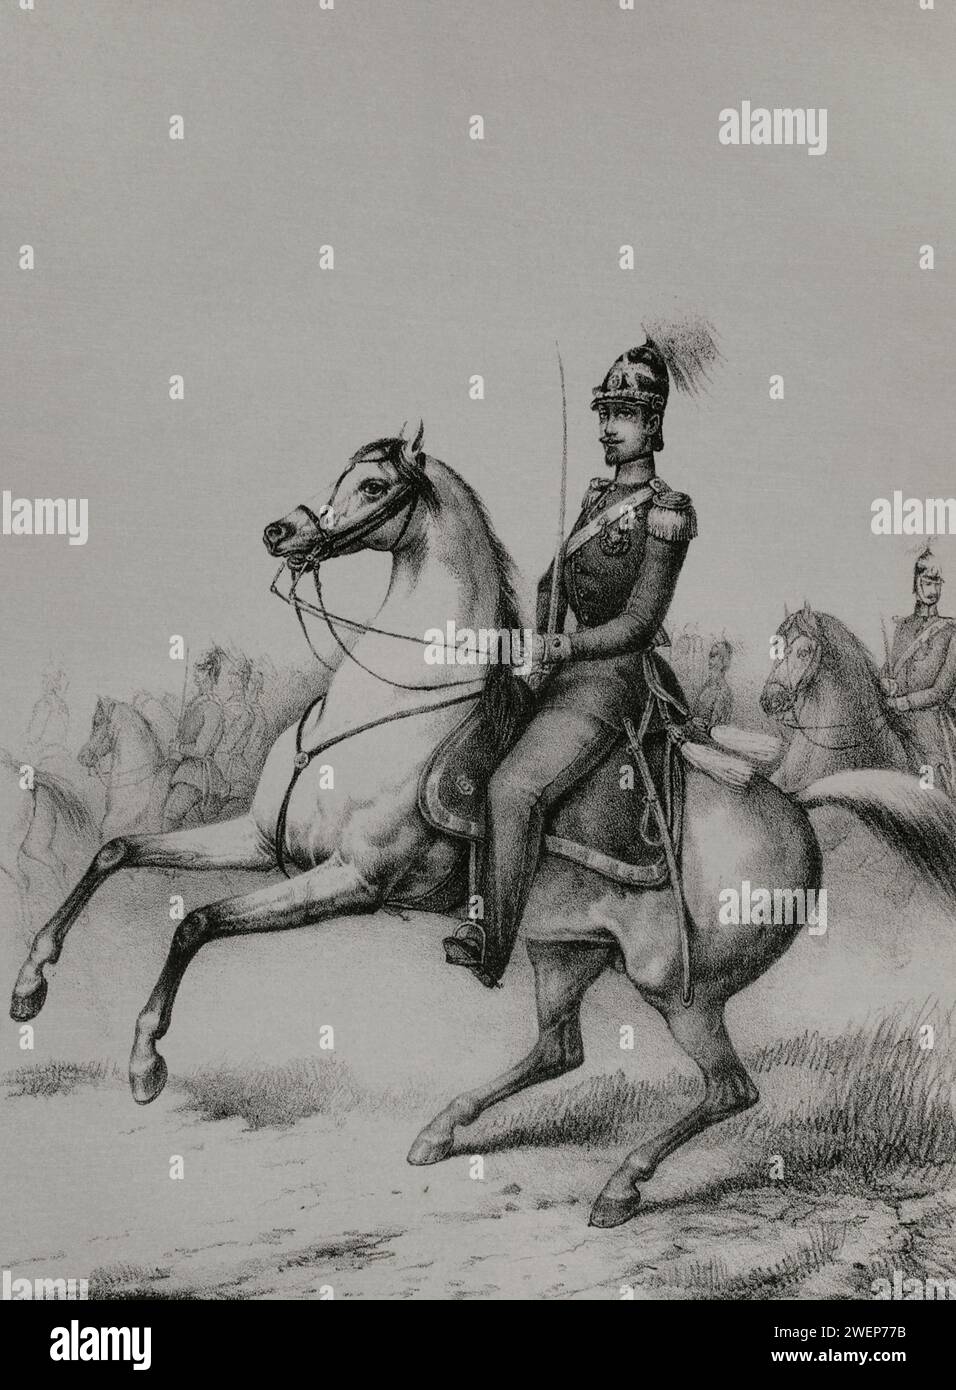 Frederick I (1826-1907). Grand Duke of Baden (1856-1907). Equestrian portrait. Drawing by M. Iglesias. Lithography by J.J. Martinez. 'Reyes Contemporáneos' (Contemporary Kings). Volume II. Published in Madrid, 1852. Stock Photo